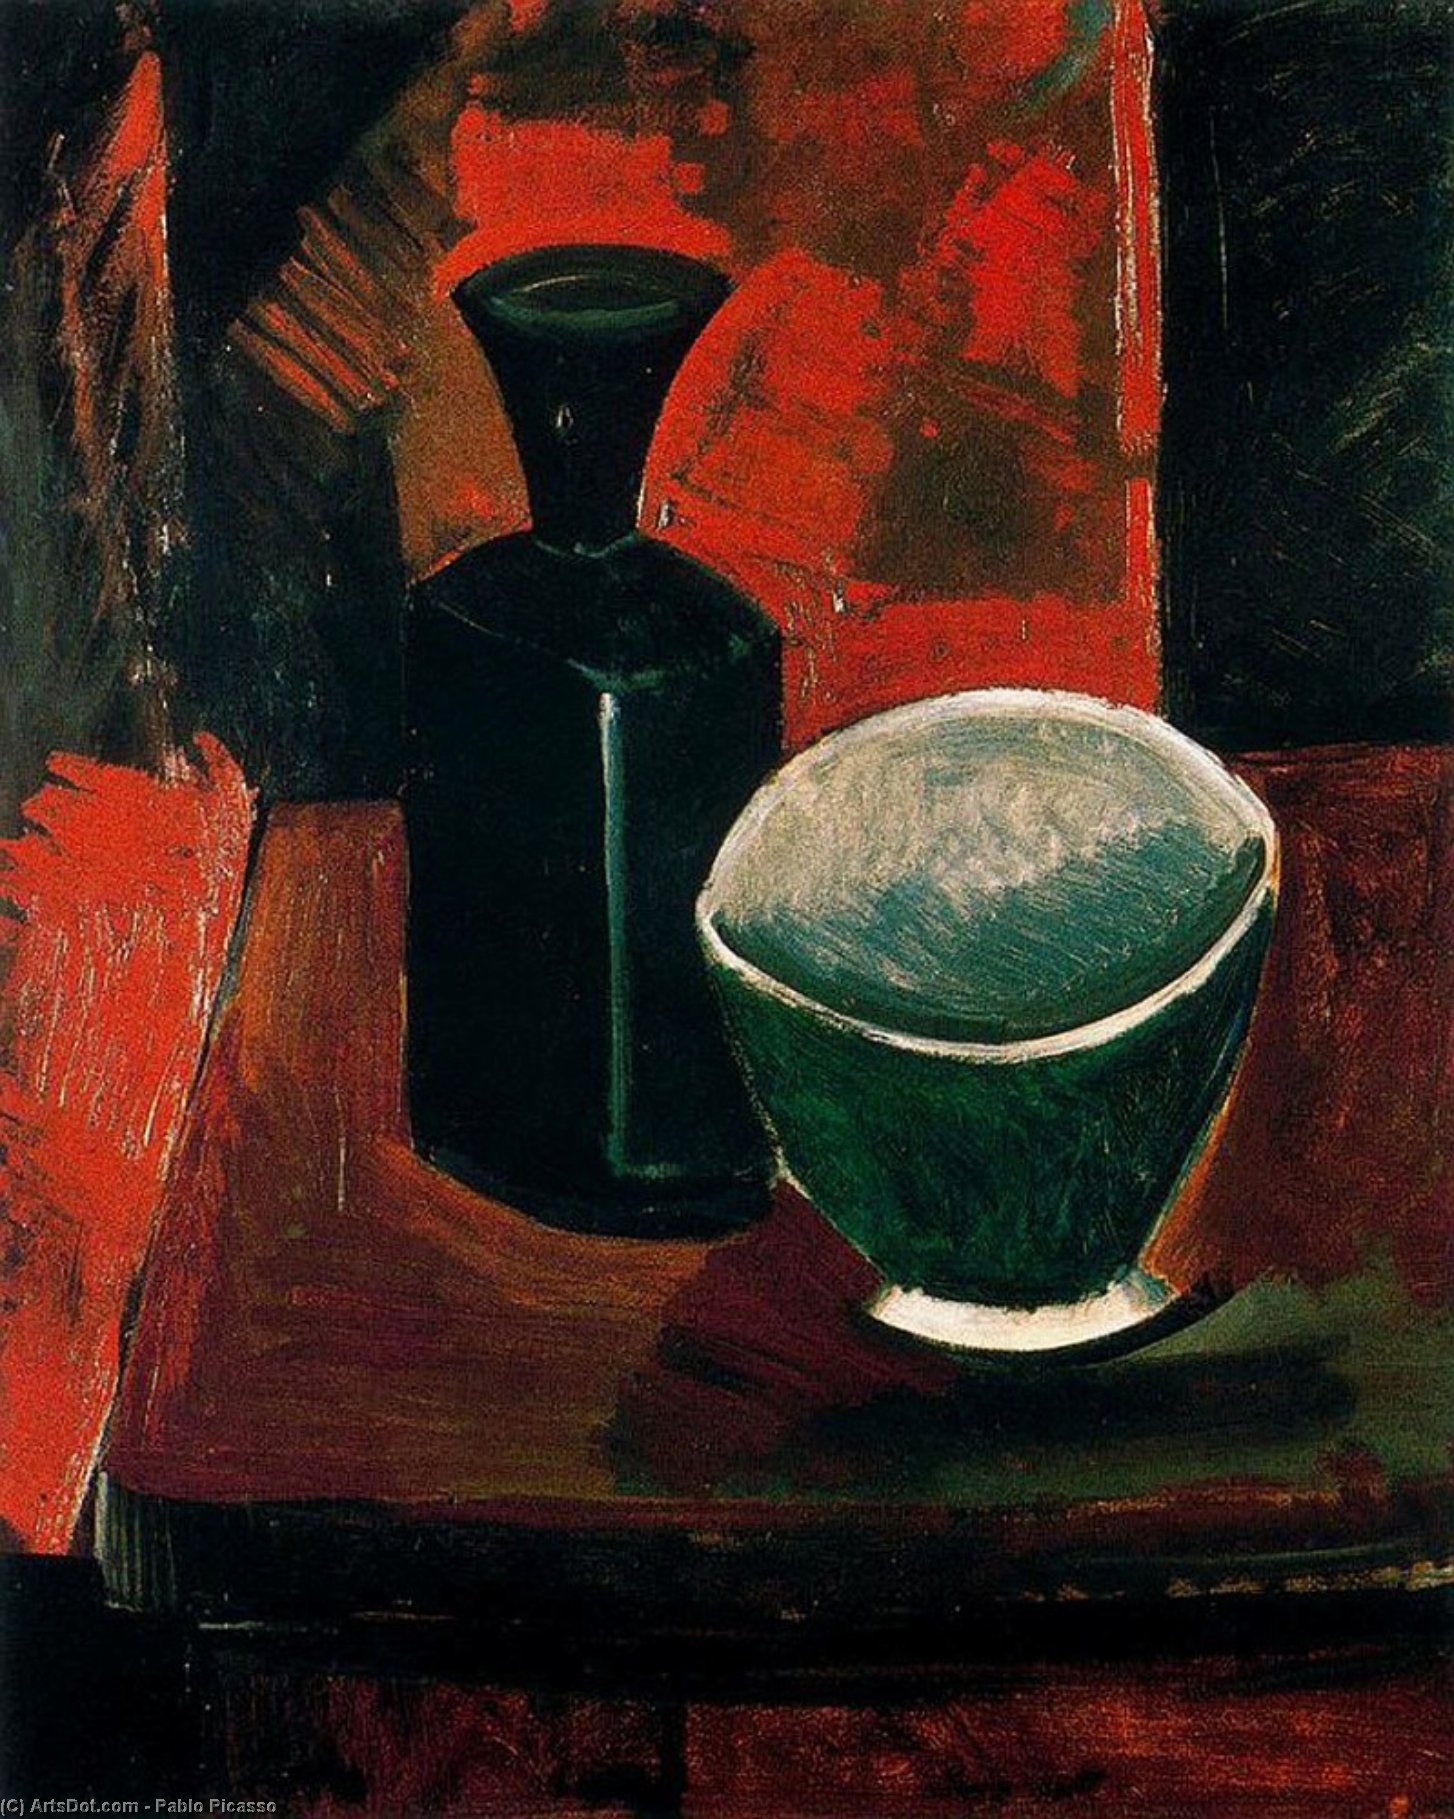 WikiOO.org - Encyclopedia of Fine Arts - Malba, Artwork Pablo Picasso - Green Pan and Black Bottle